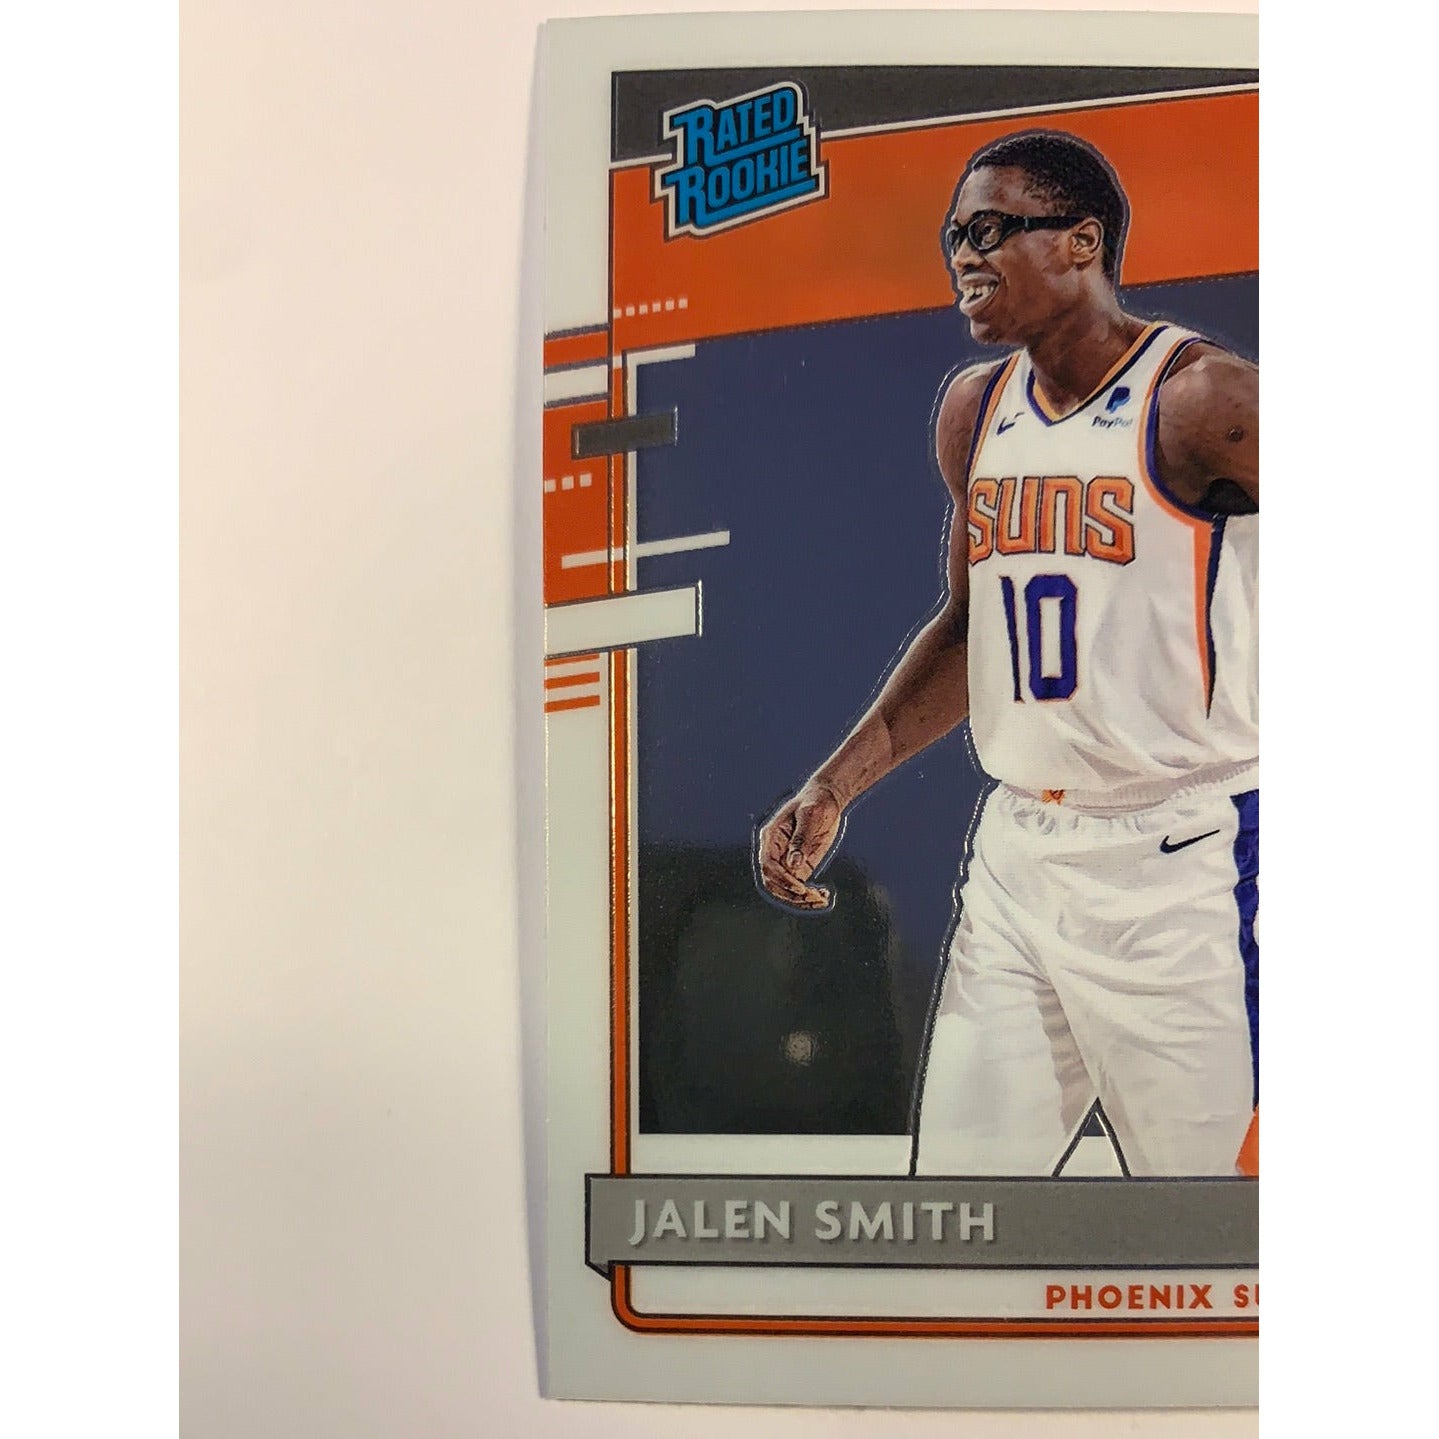  2020-21 Donruss Optic Jalen Smith Rated Rookie  Local Legends Cards & Collectibles